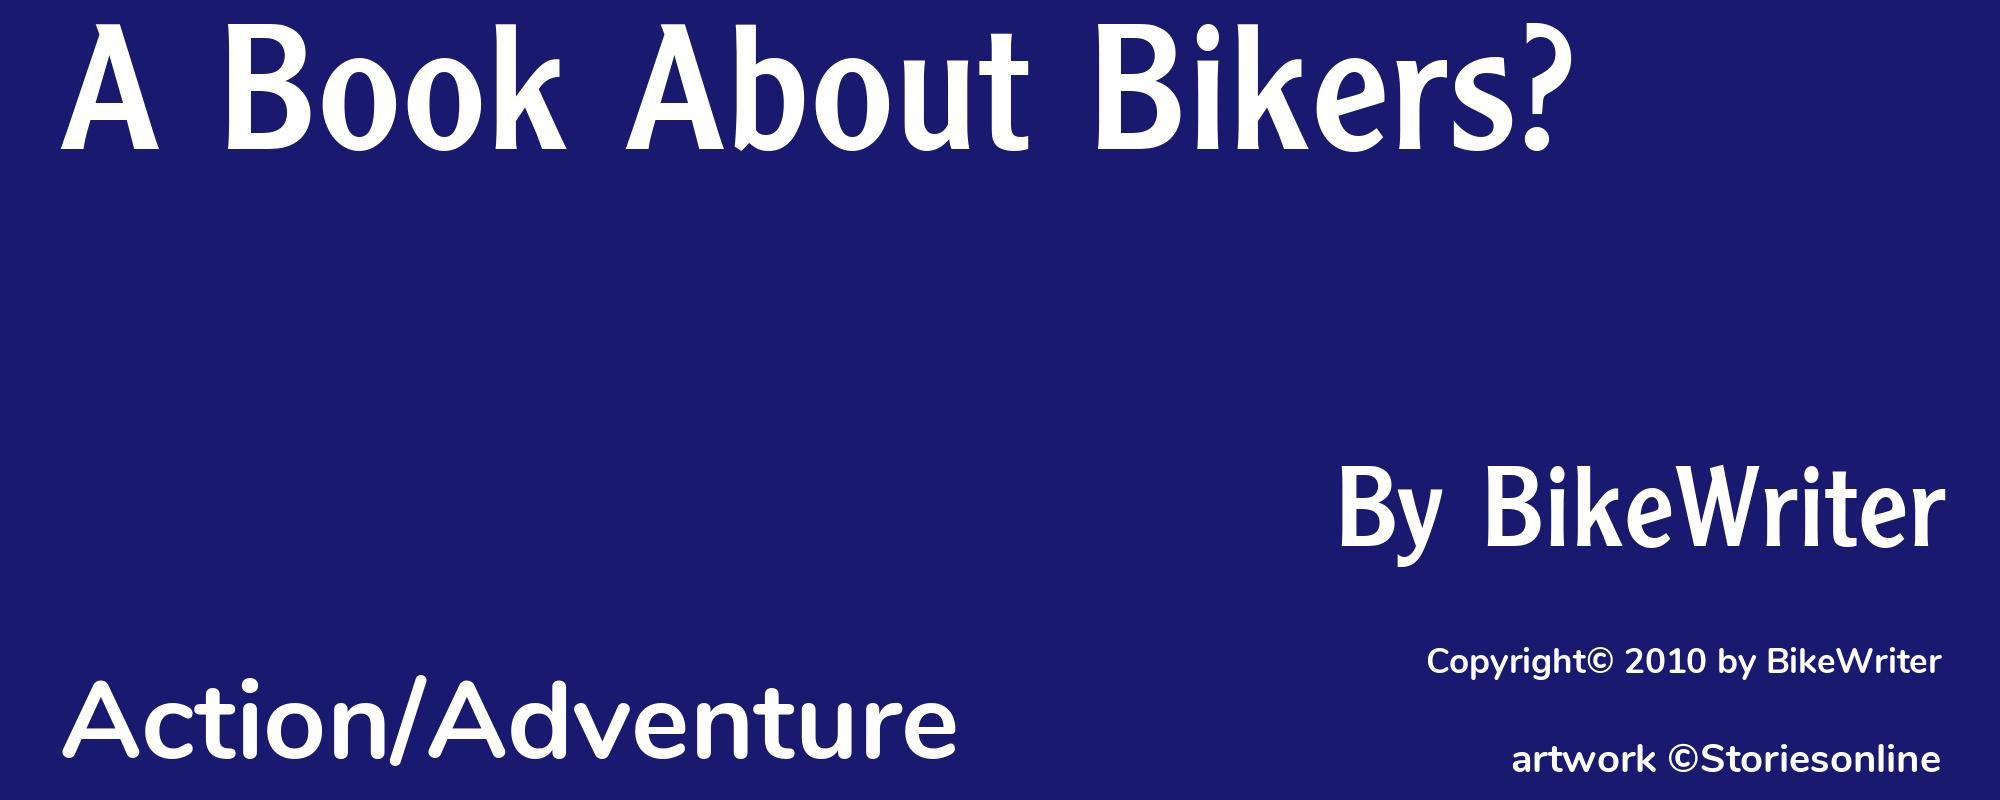 A Book About Bikers? - Cover